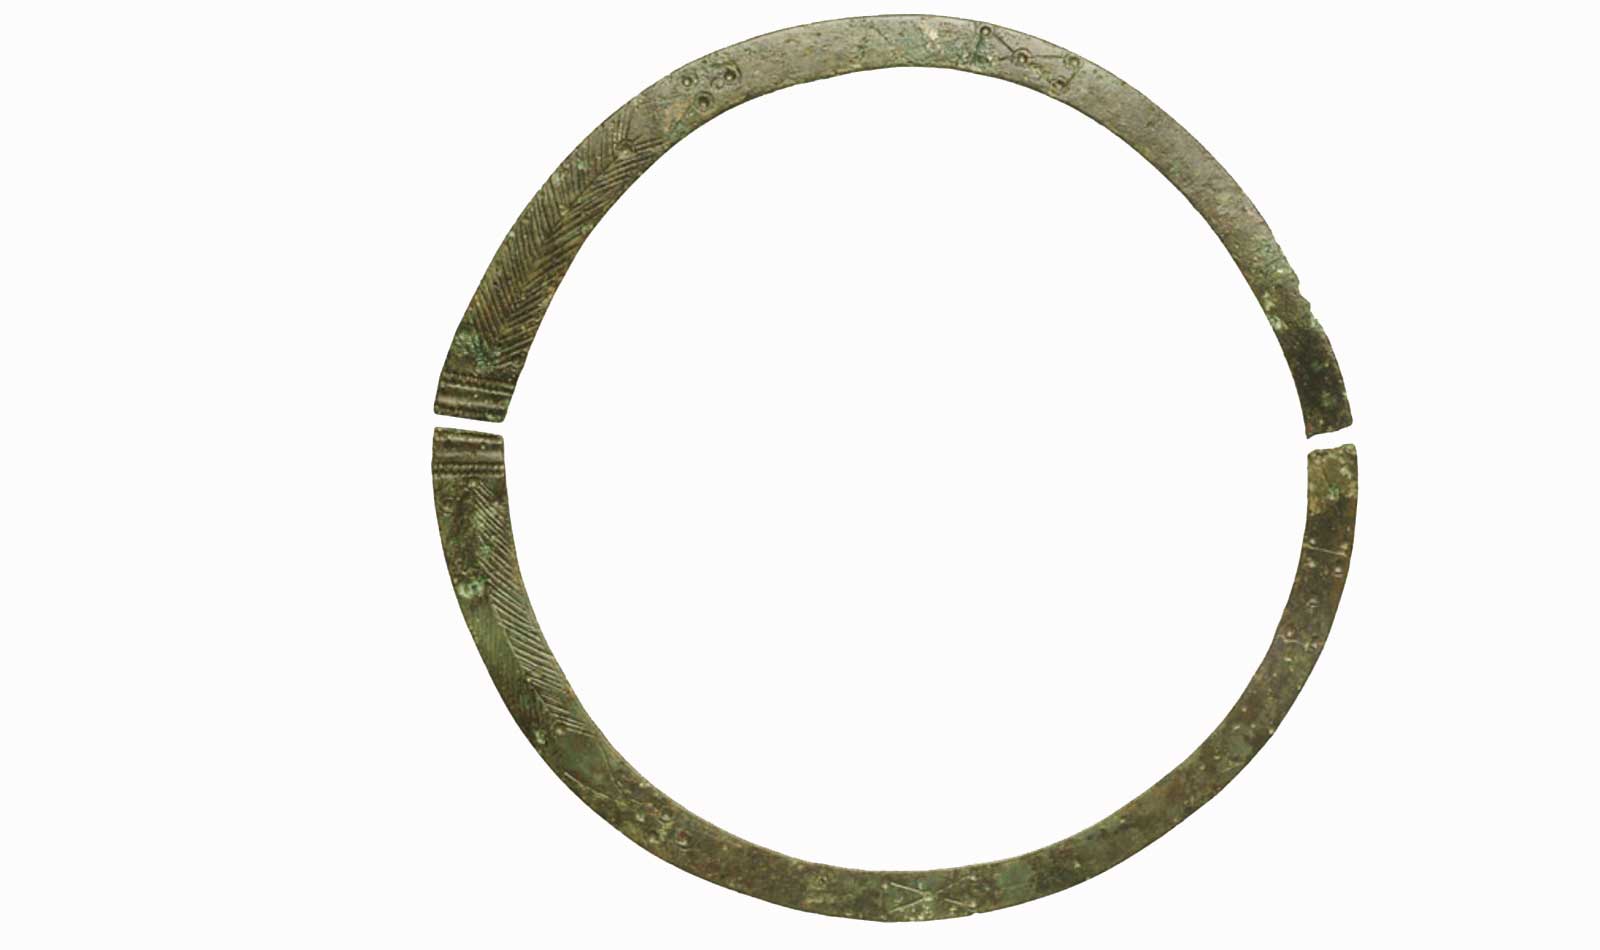 A bronze neck ring or torc found in the Harper Road burial